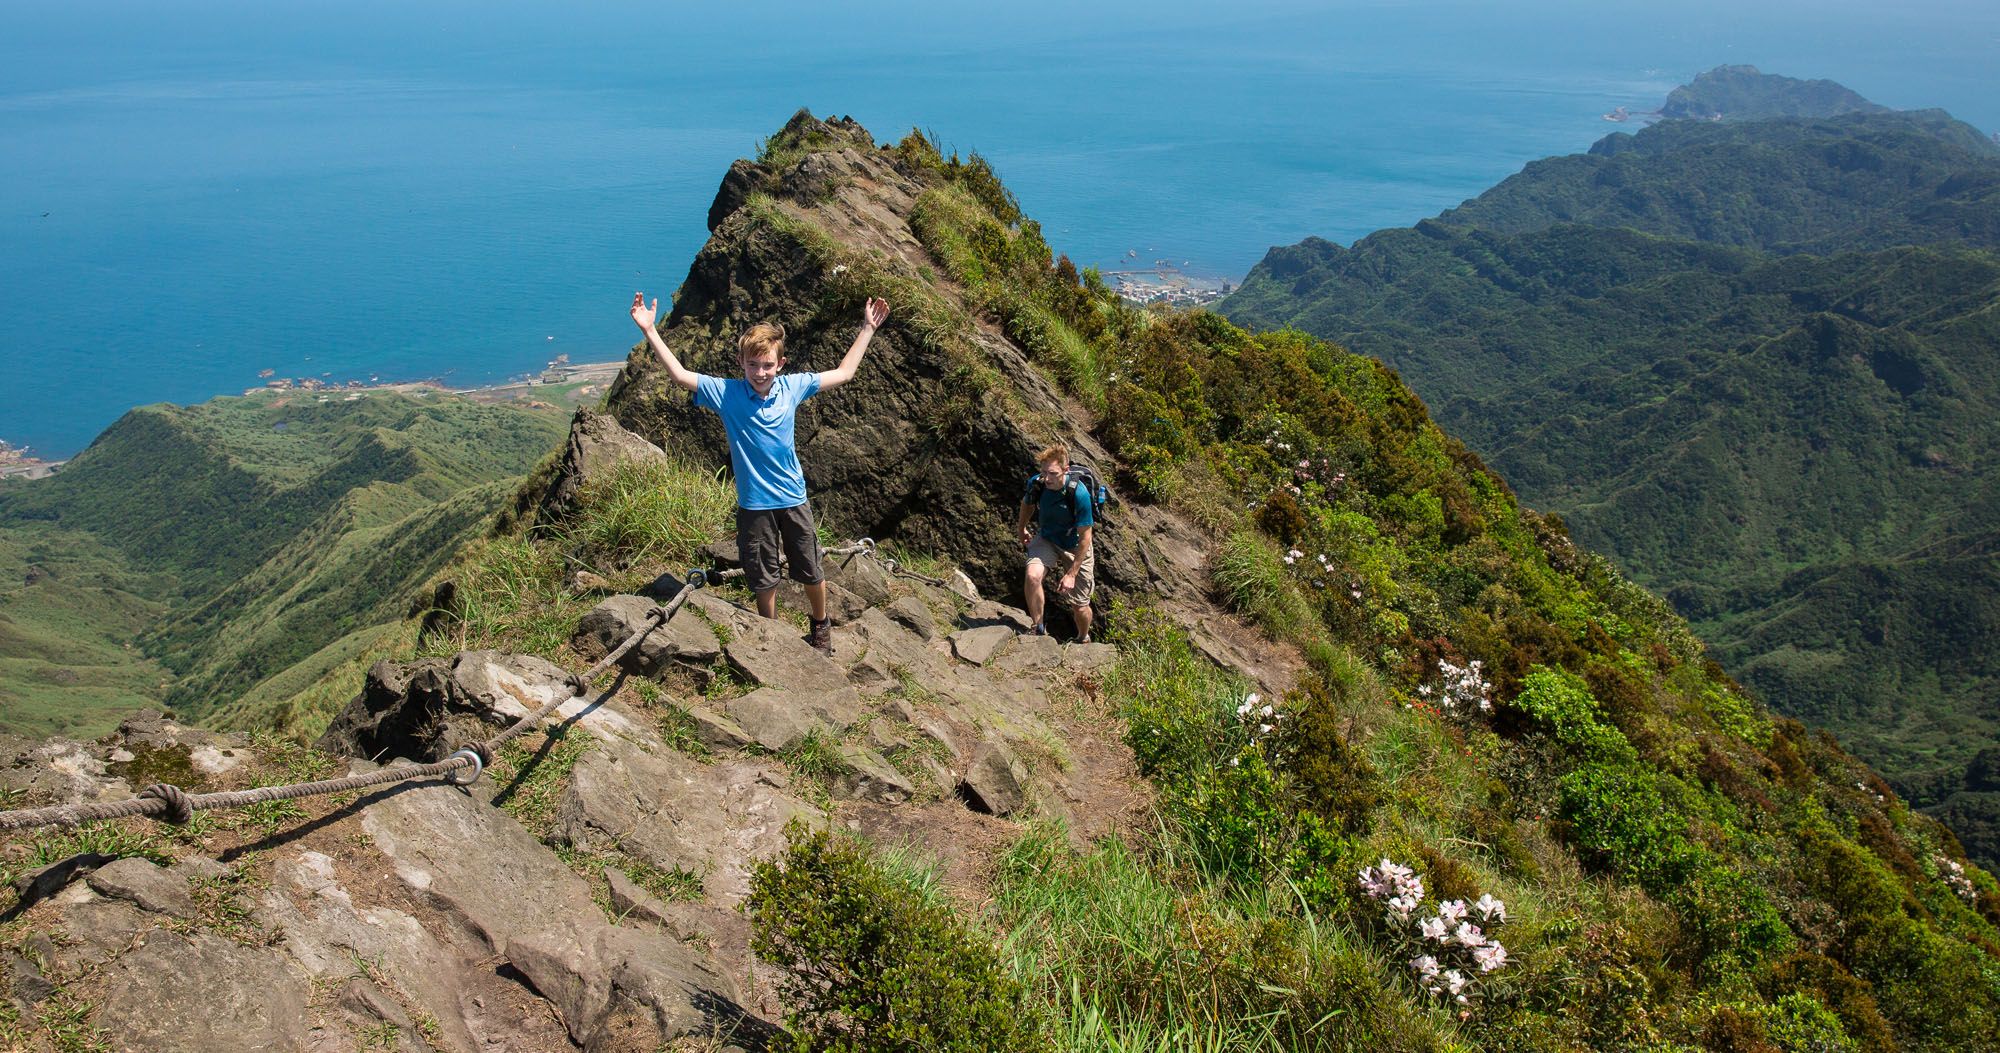 Featured image for “Hiking Teapot Mountain in Taiwan”